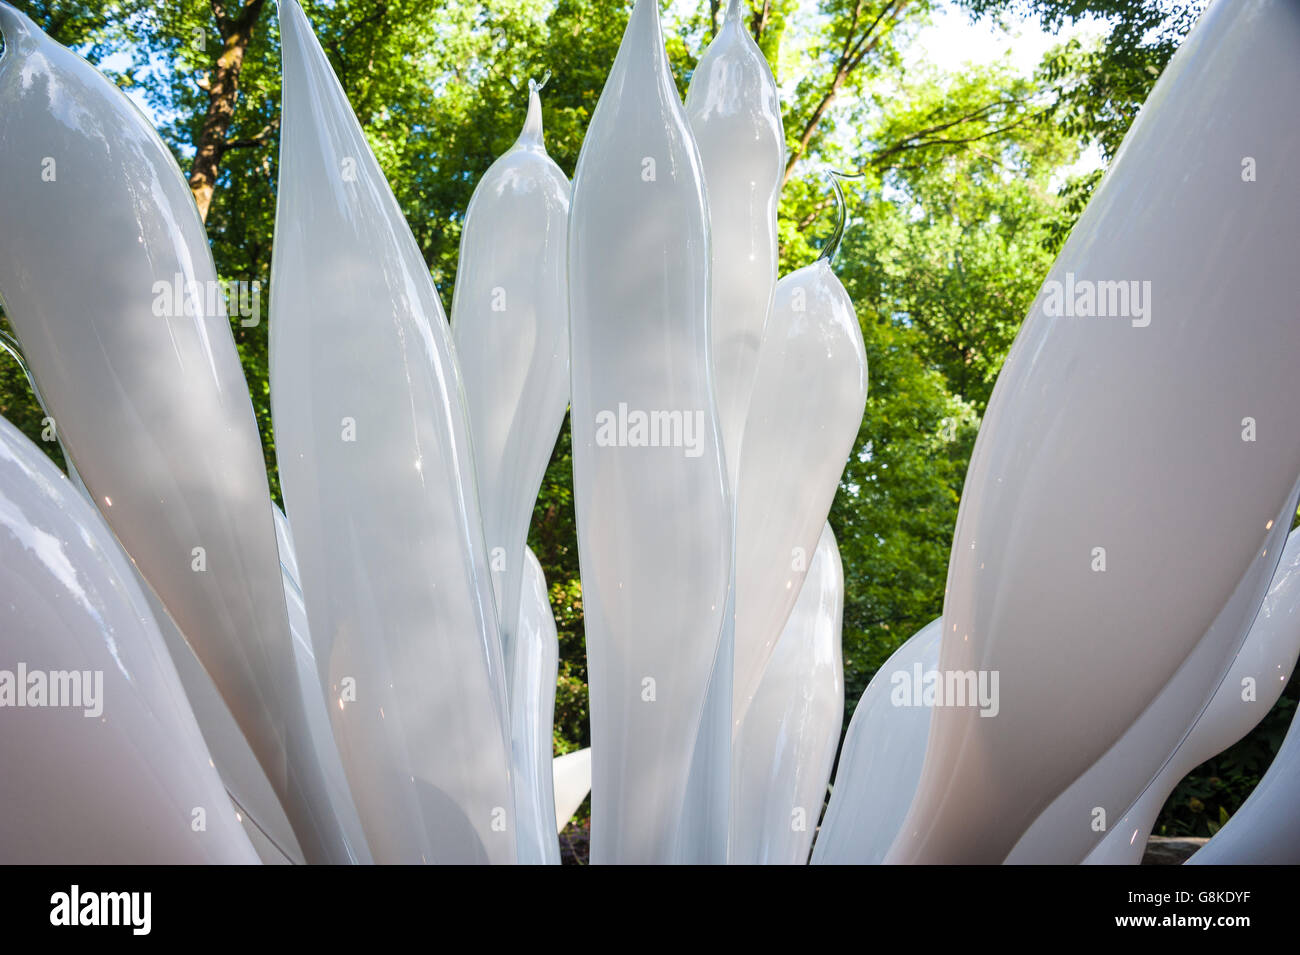 'White Belugas' glass sculpture by Dale Chihuly at Atlanta Botanical Garden's Chihuly in the Garden exhibit. Stock Photo